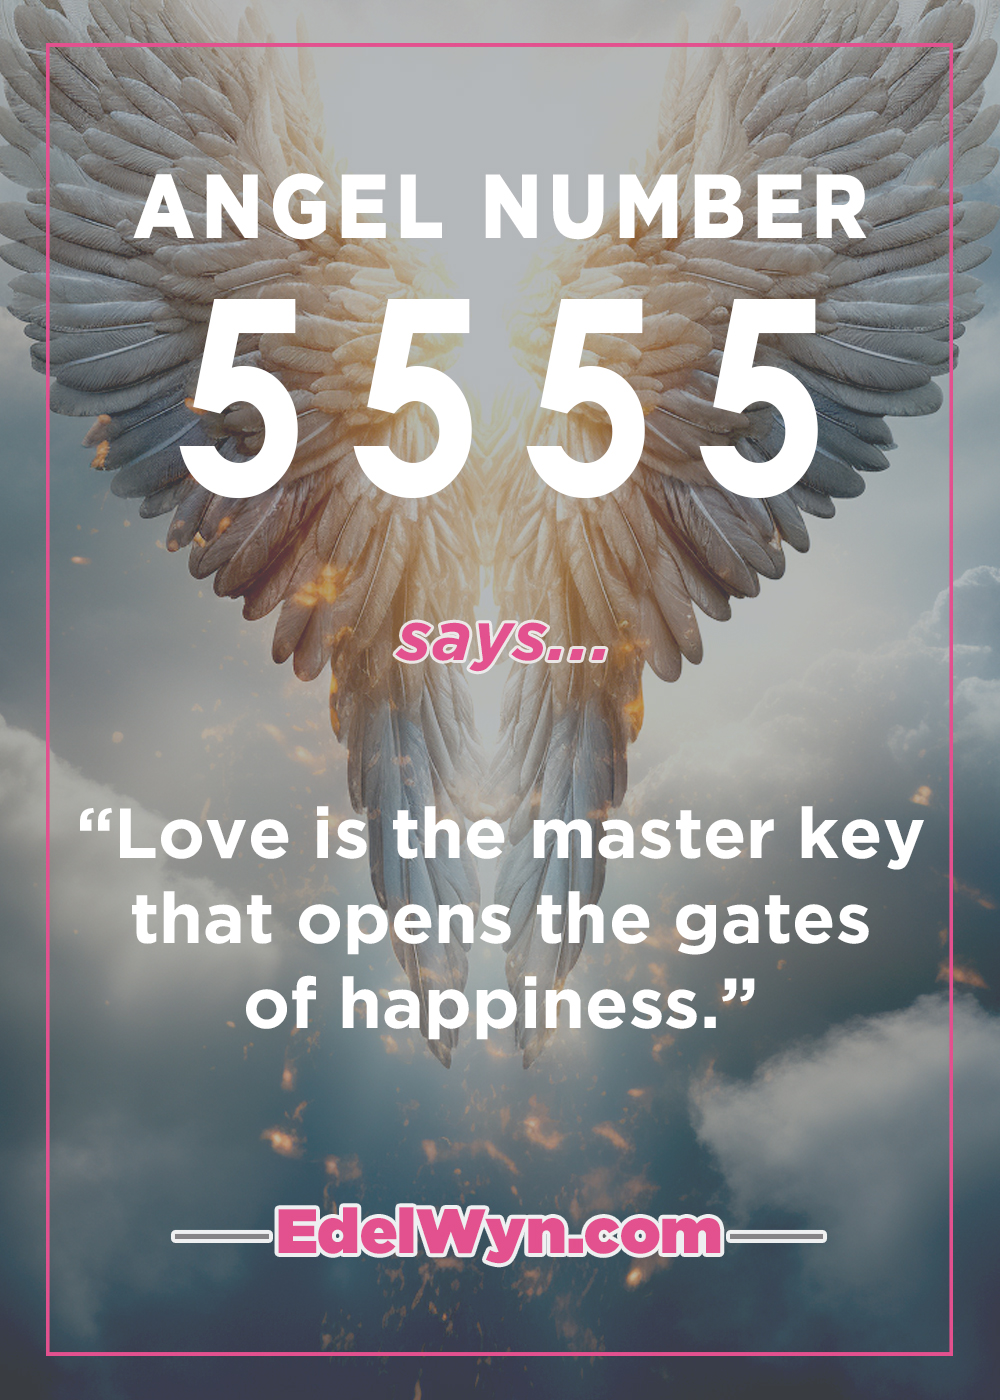 Everyone Makes This Mistake About 5555 Angel Number…